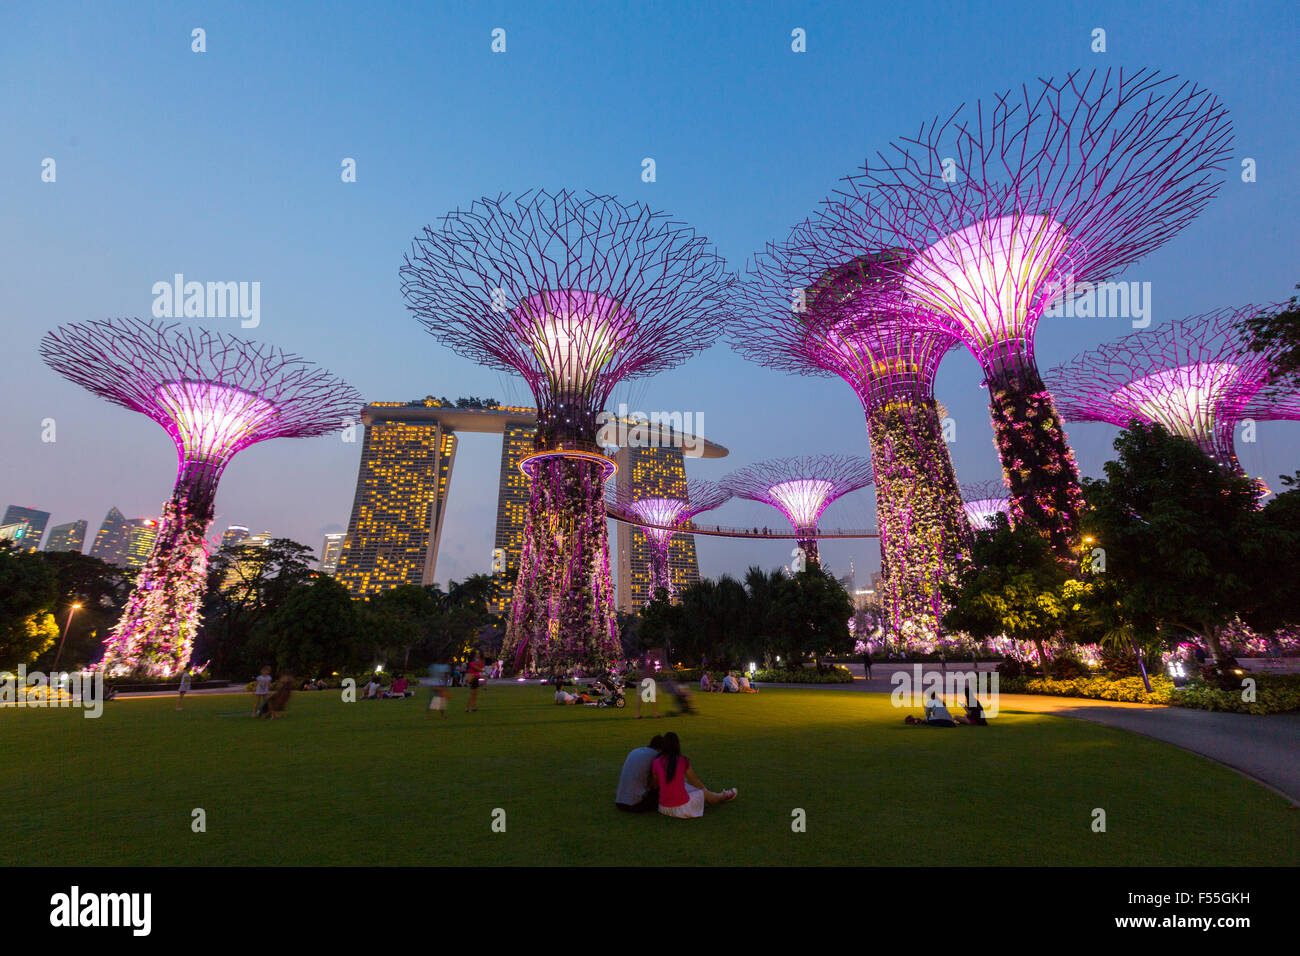 Singapore, Gardens by the bay, Supertree Grove Stock Photo